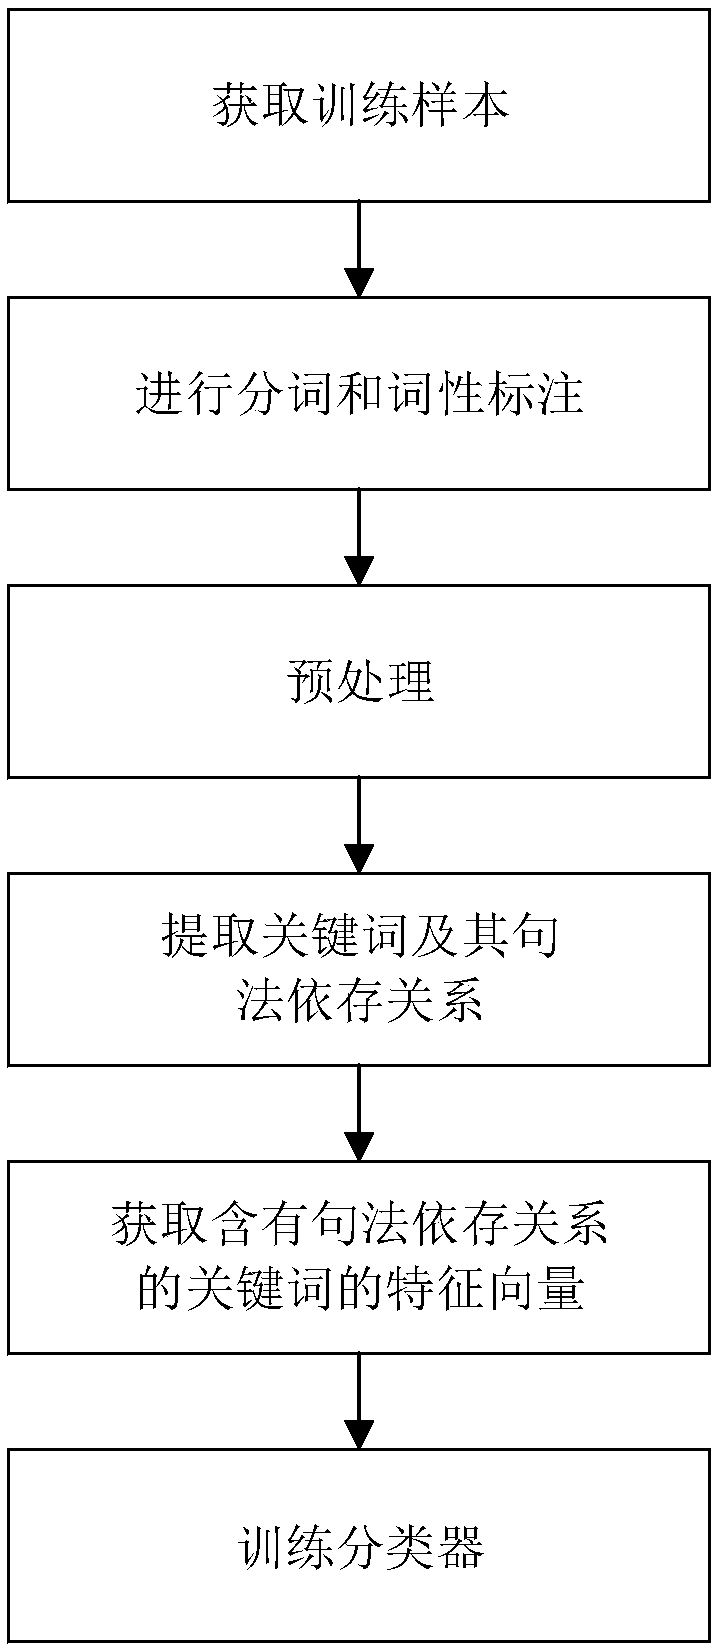 Question sentence classification method suitable for automatic question and answer system